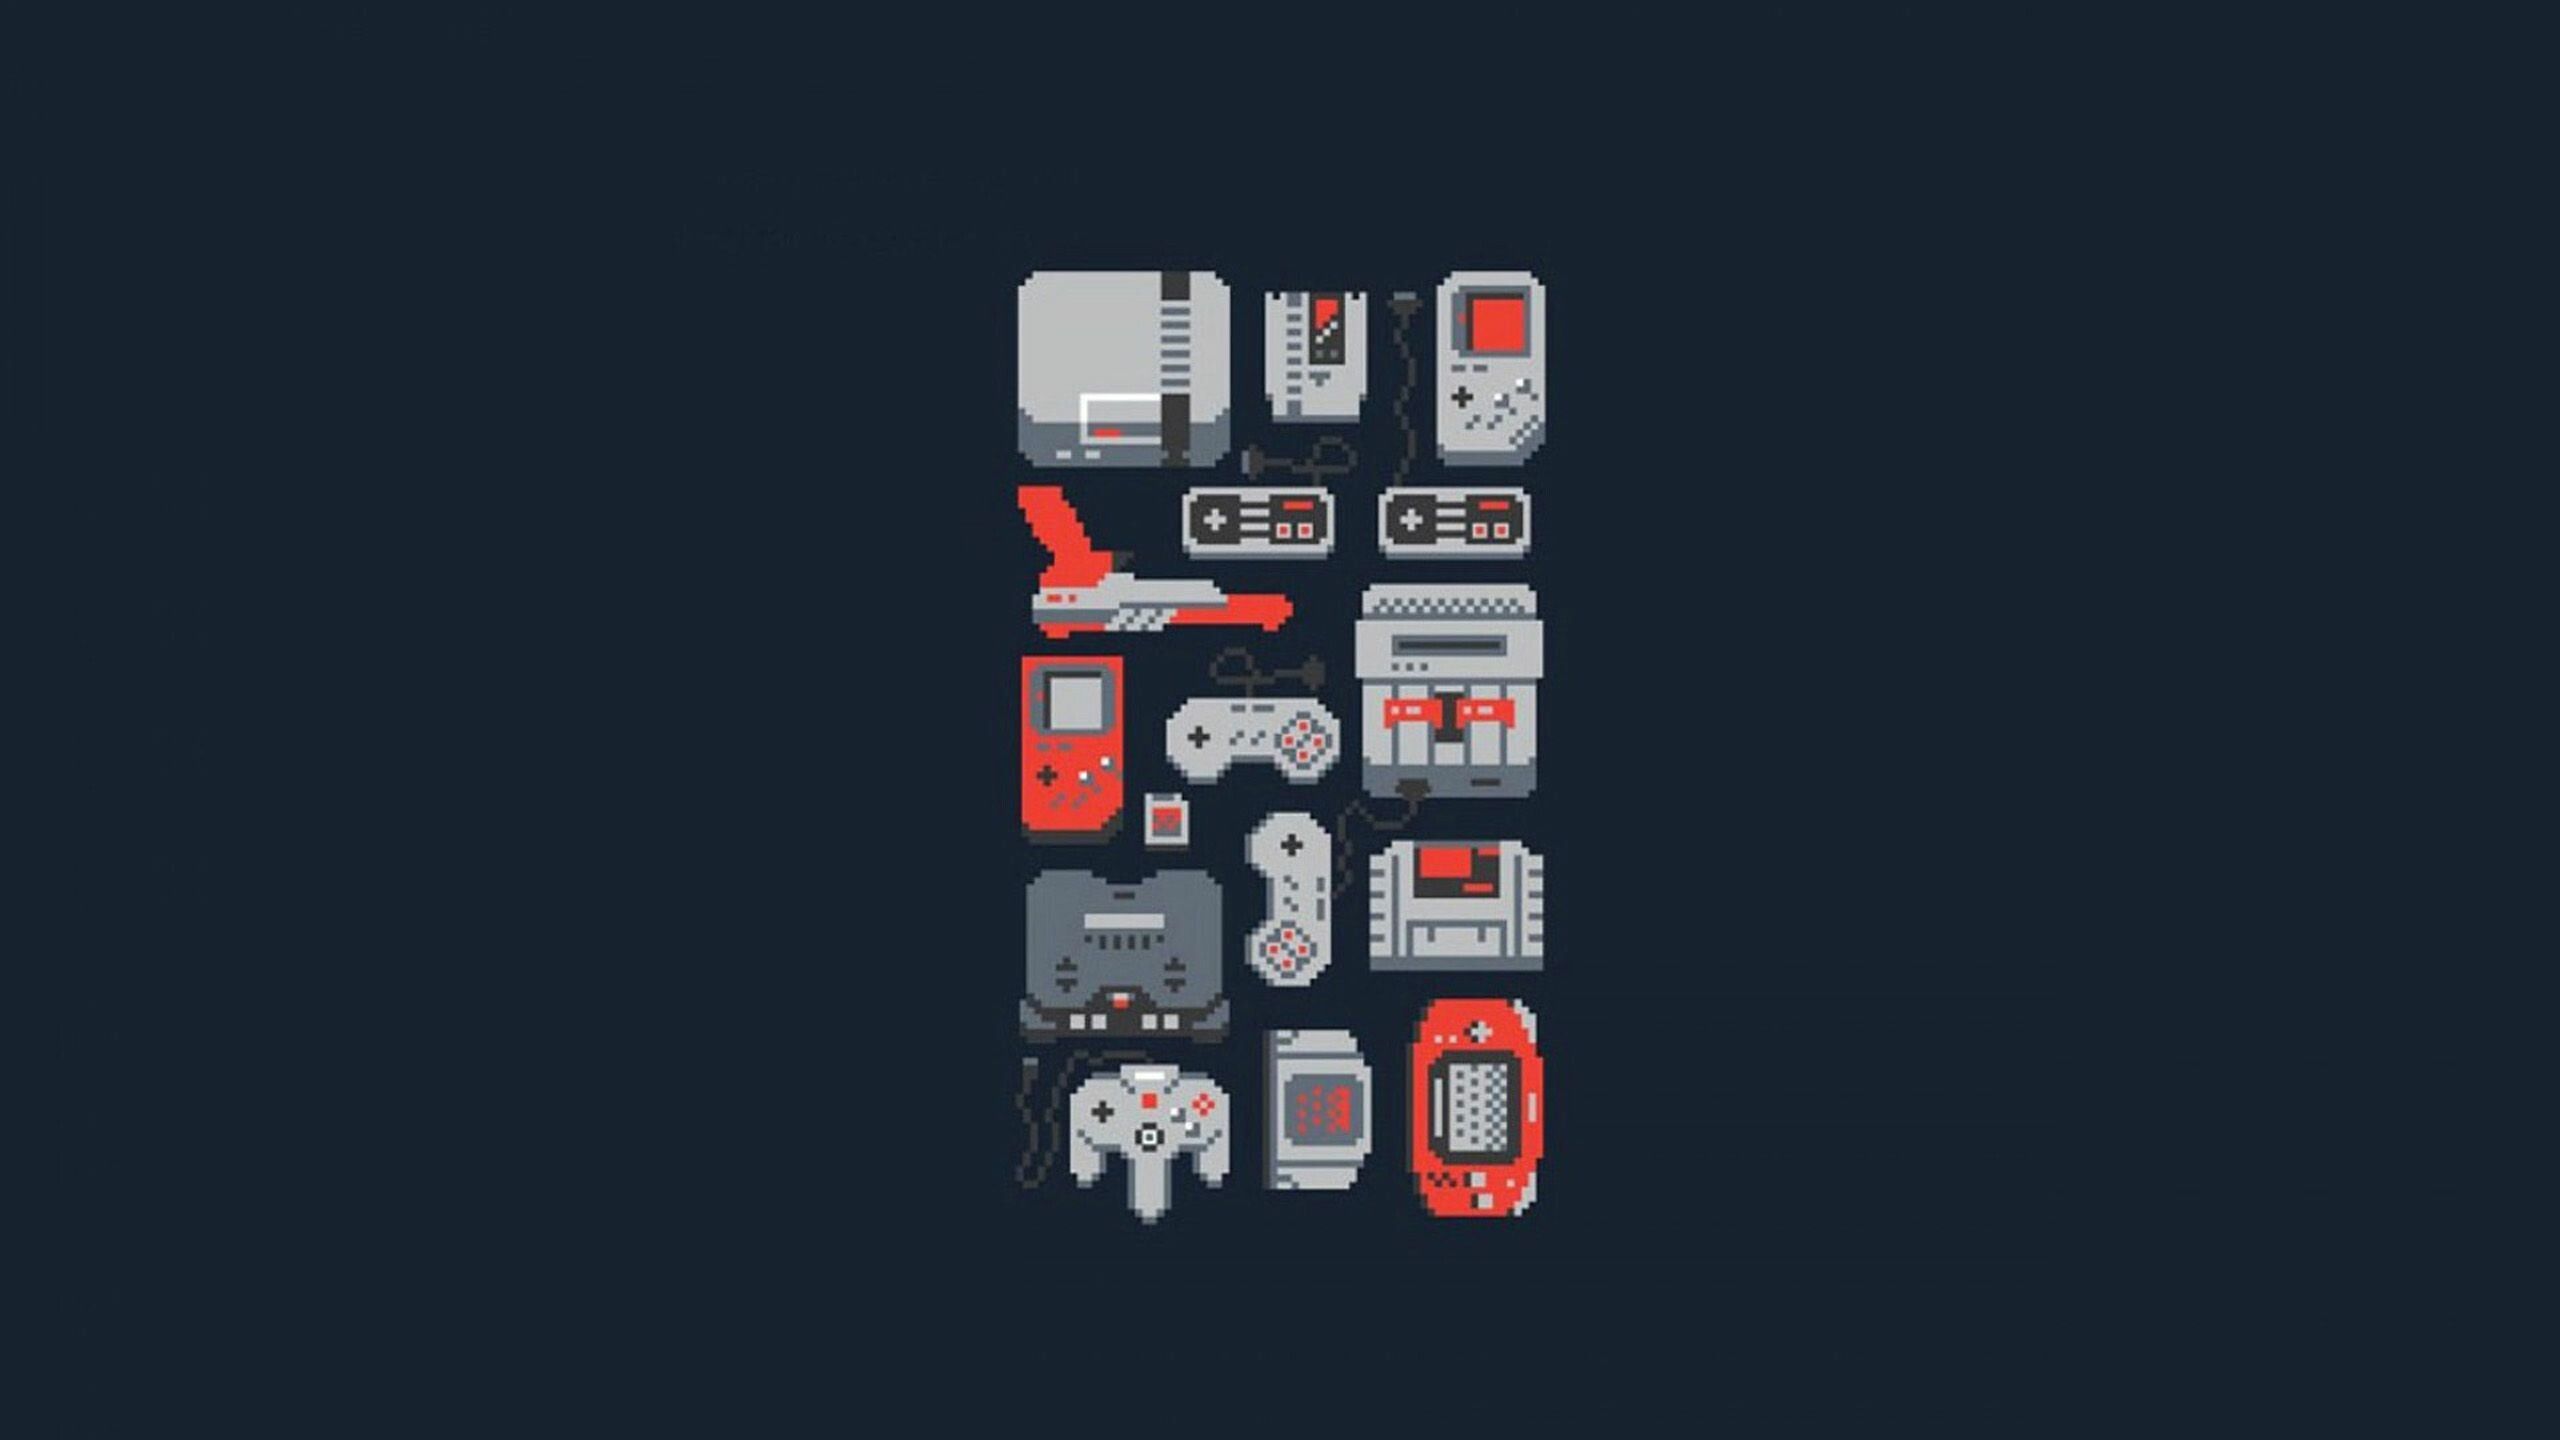 50+ Retro Game Wallpapers: HD, 4K, 5K for PC and Mobile